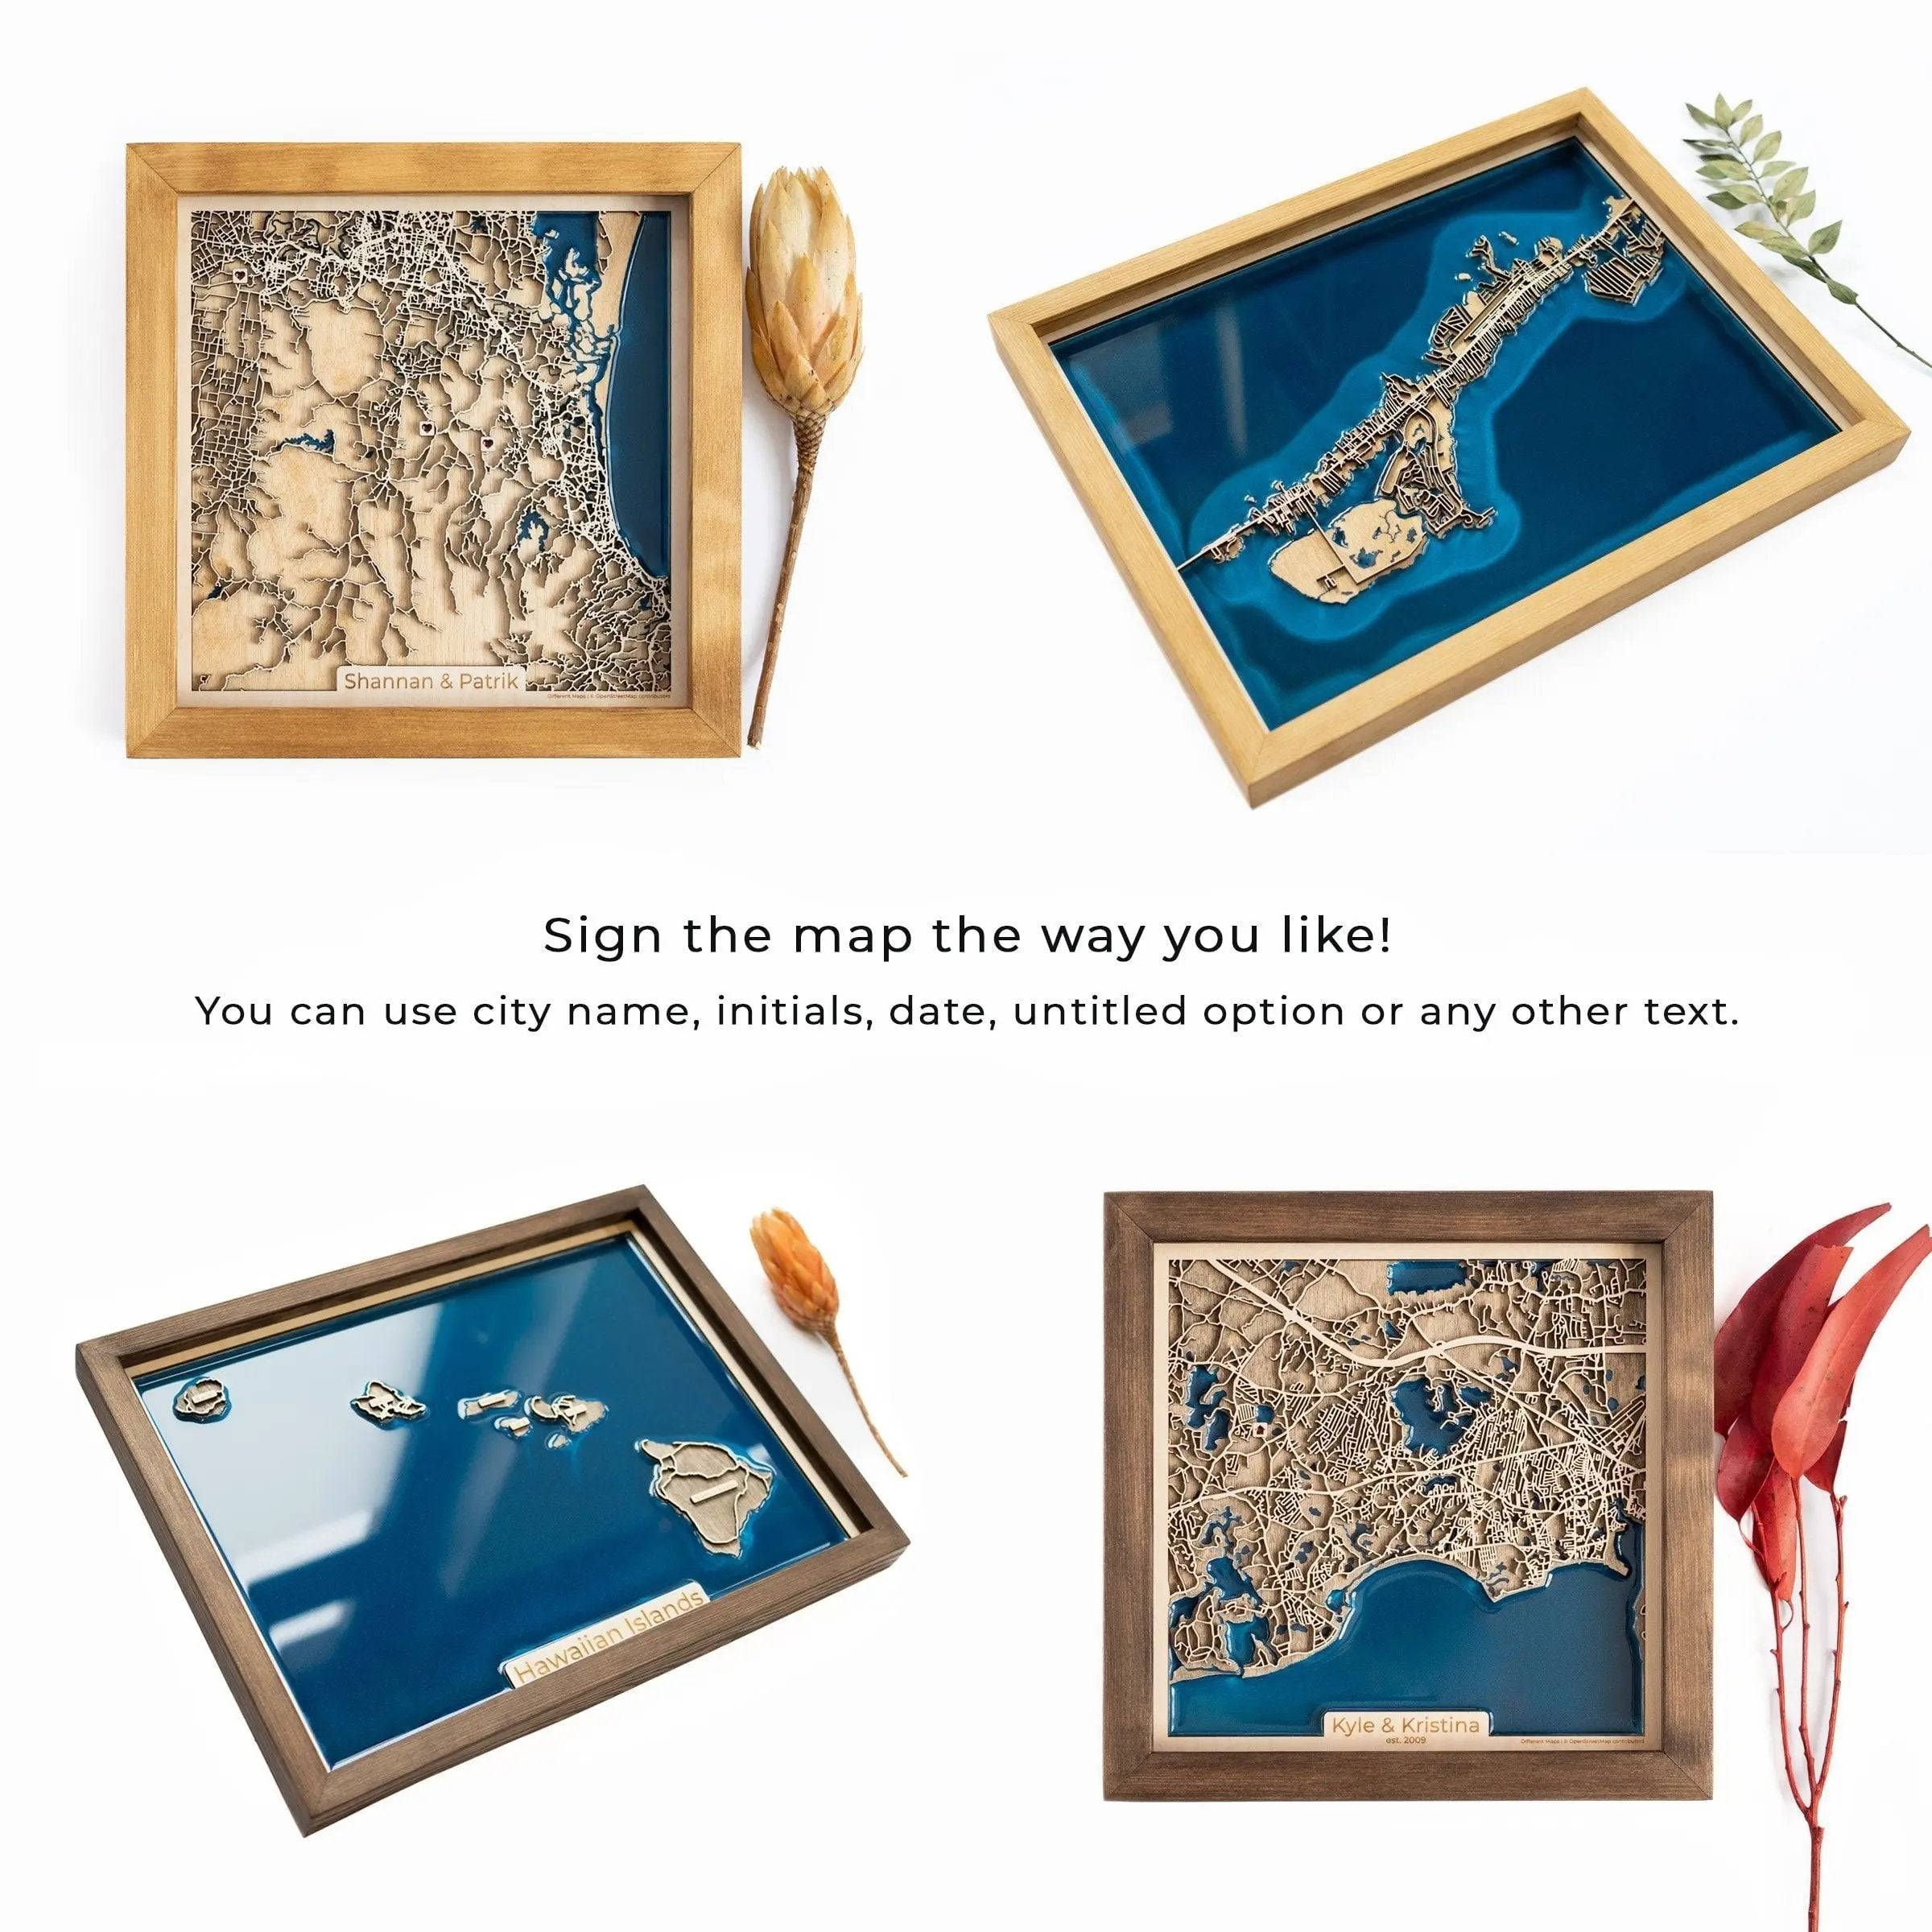 Sign the map the way you like! You can use city name, initials, date, untitled option or any other text.Add an engraving on the back of the map and tell your loved one a few important words, make wishes, write an important date or a quote. Such an engraving will make your gift one of a kind.